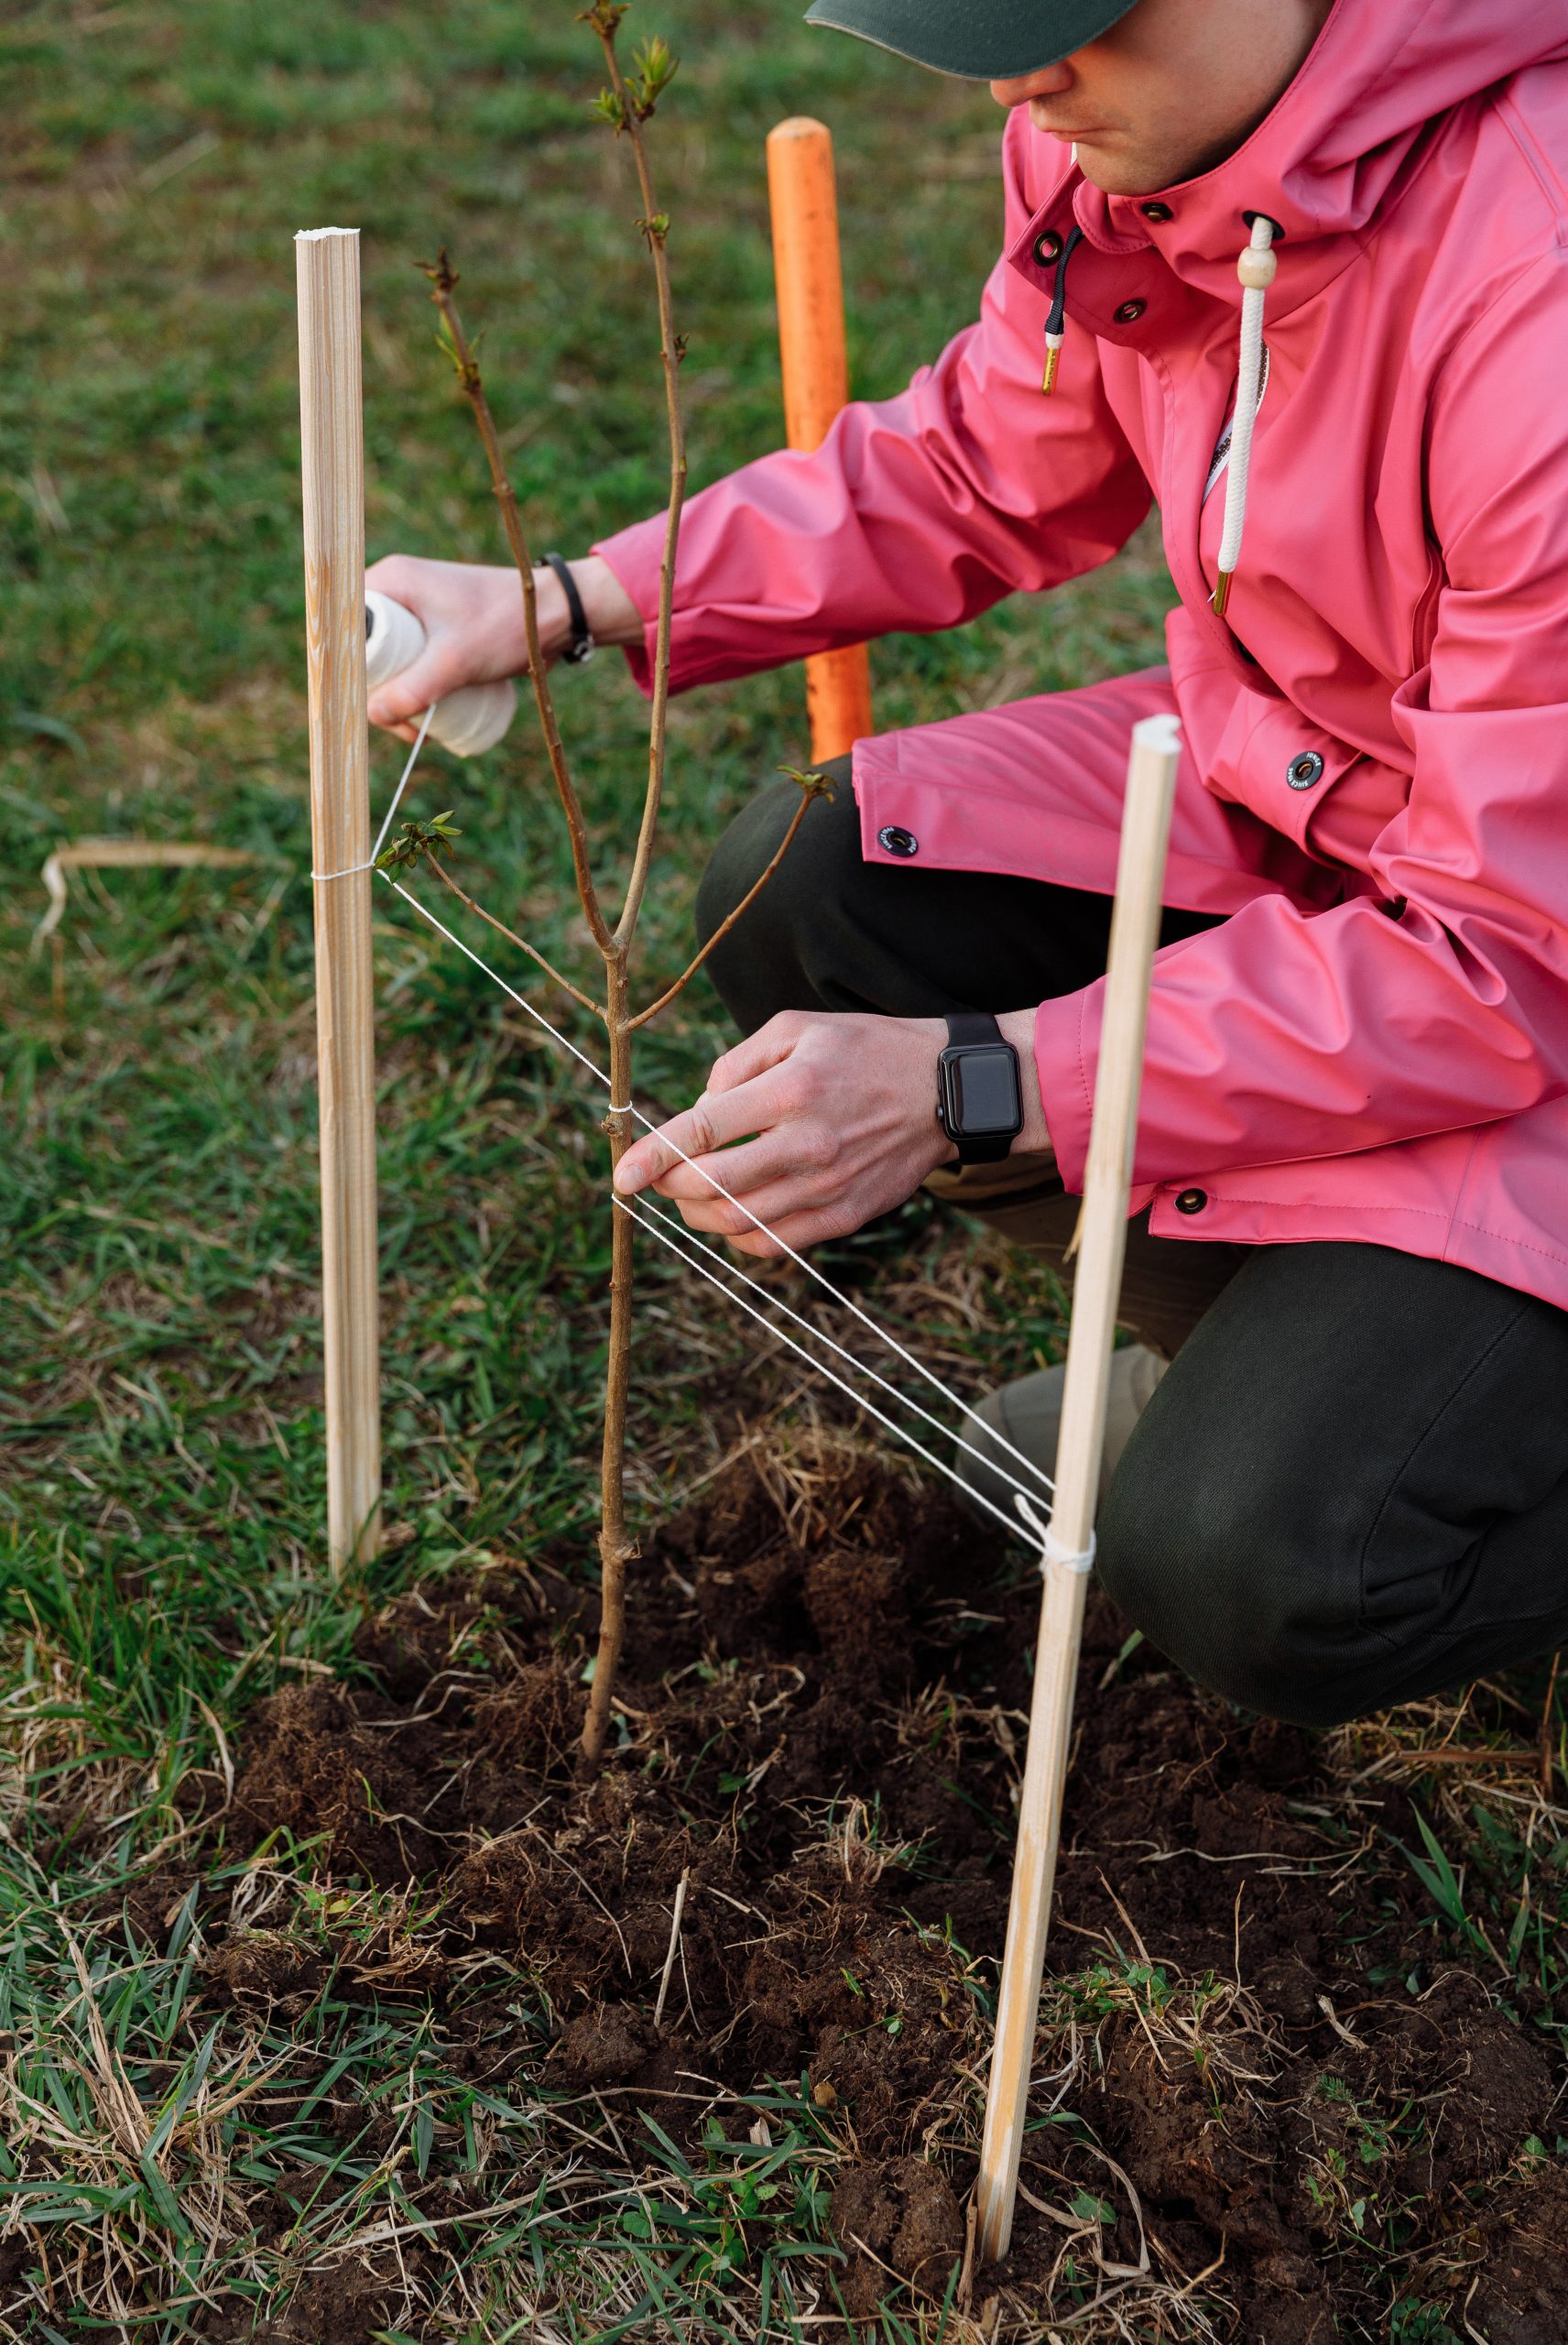 A volunteer uses string to stake a newly planted tree